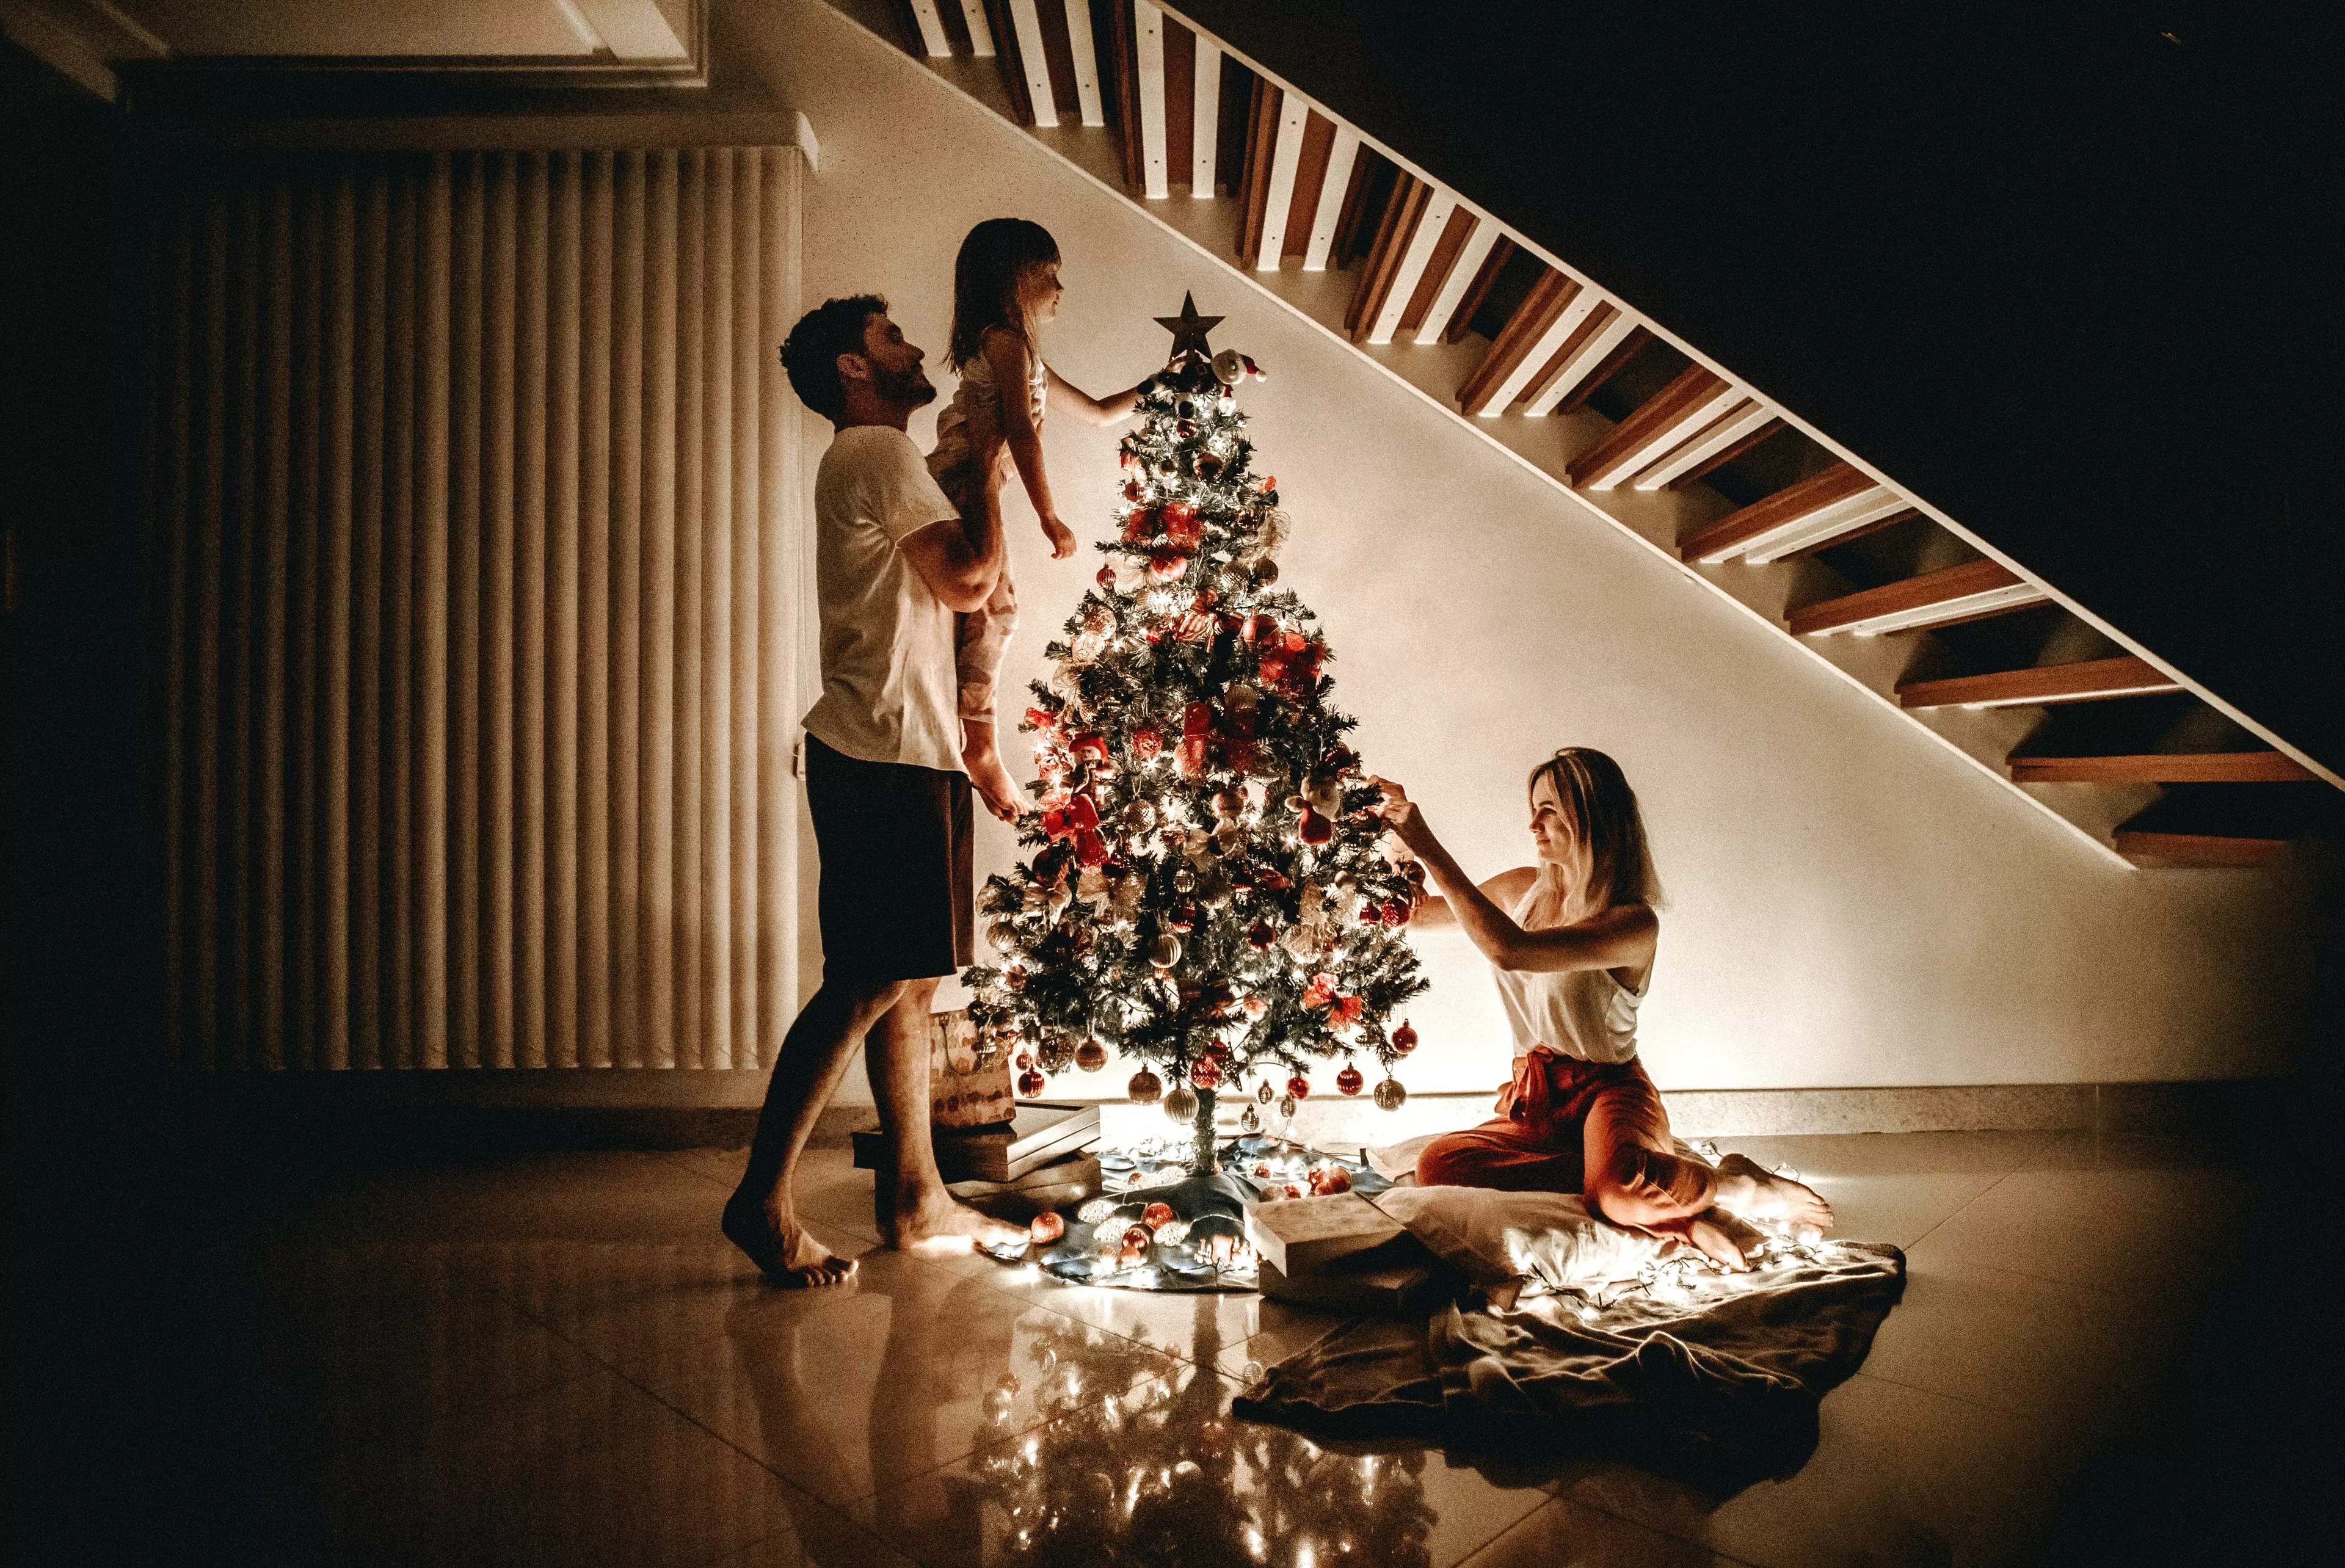 Experts say that Christmas decorations are linked with childhood nostalgia (